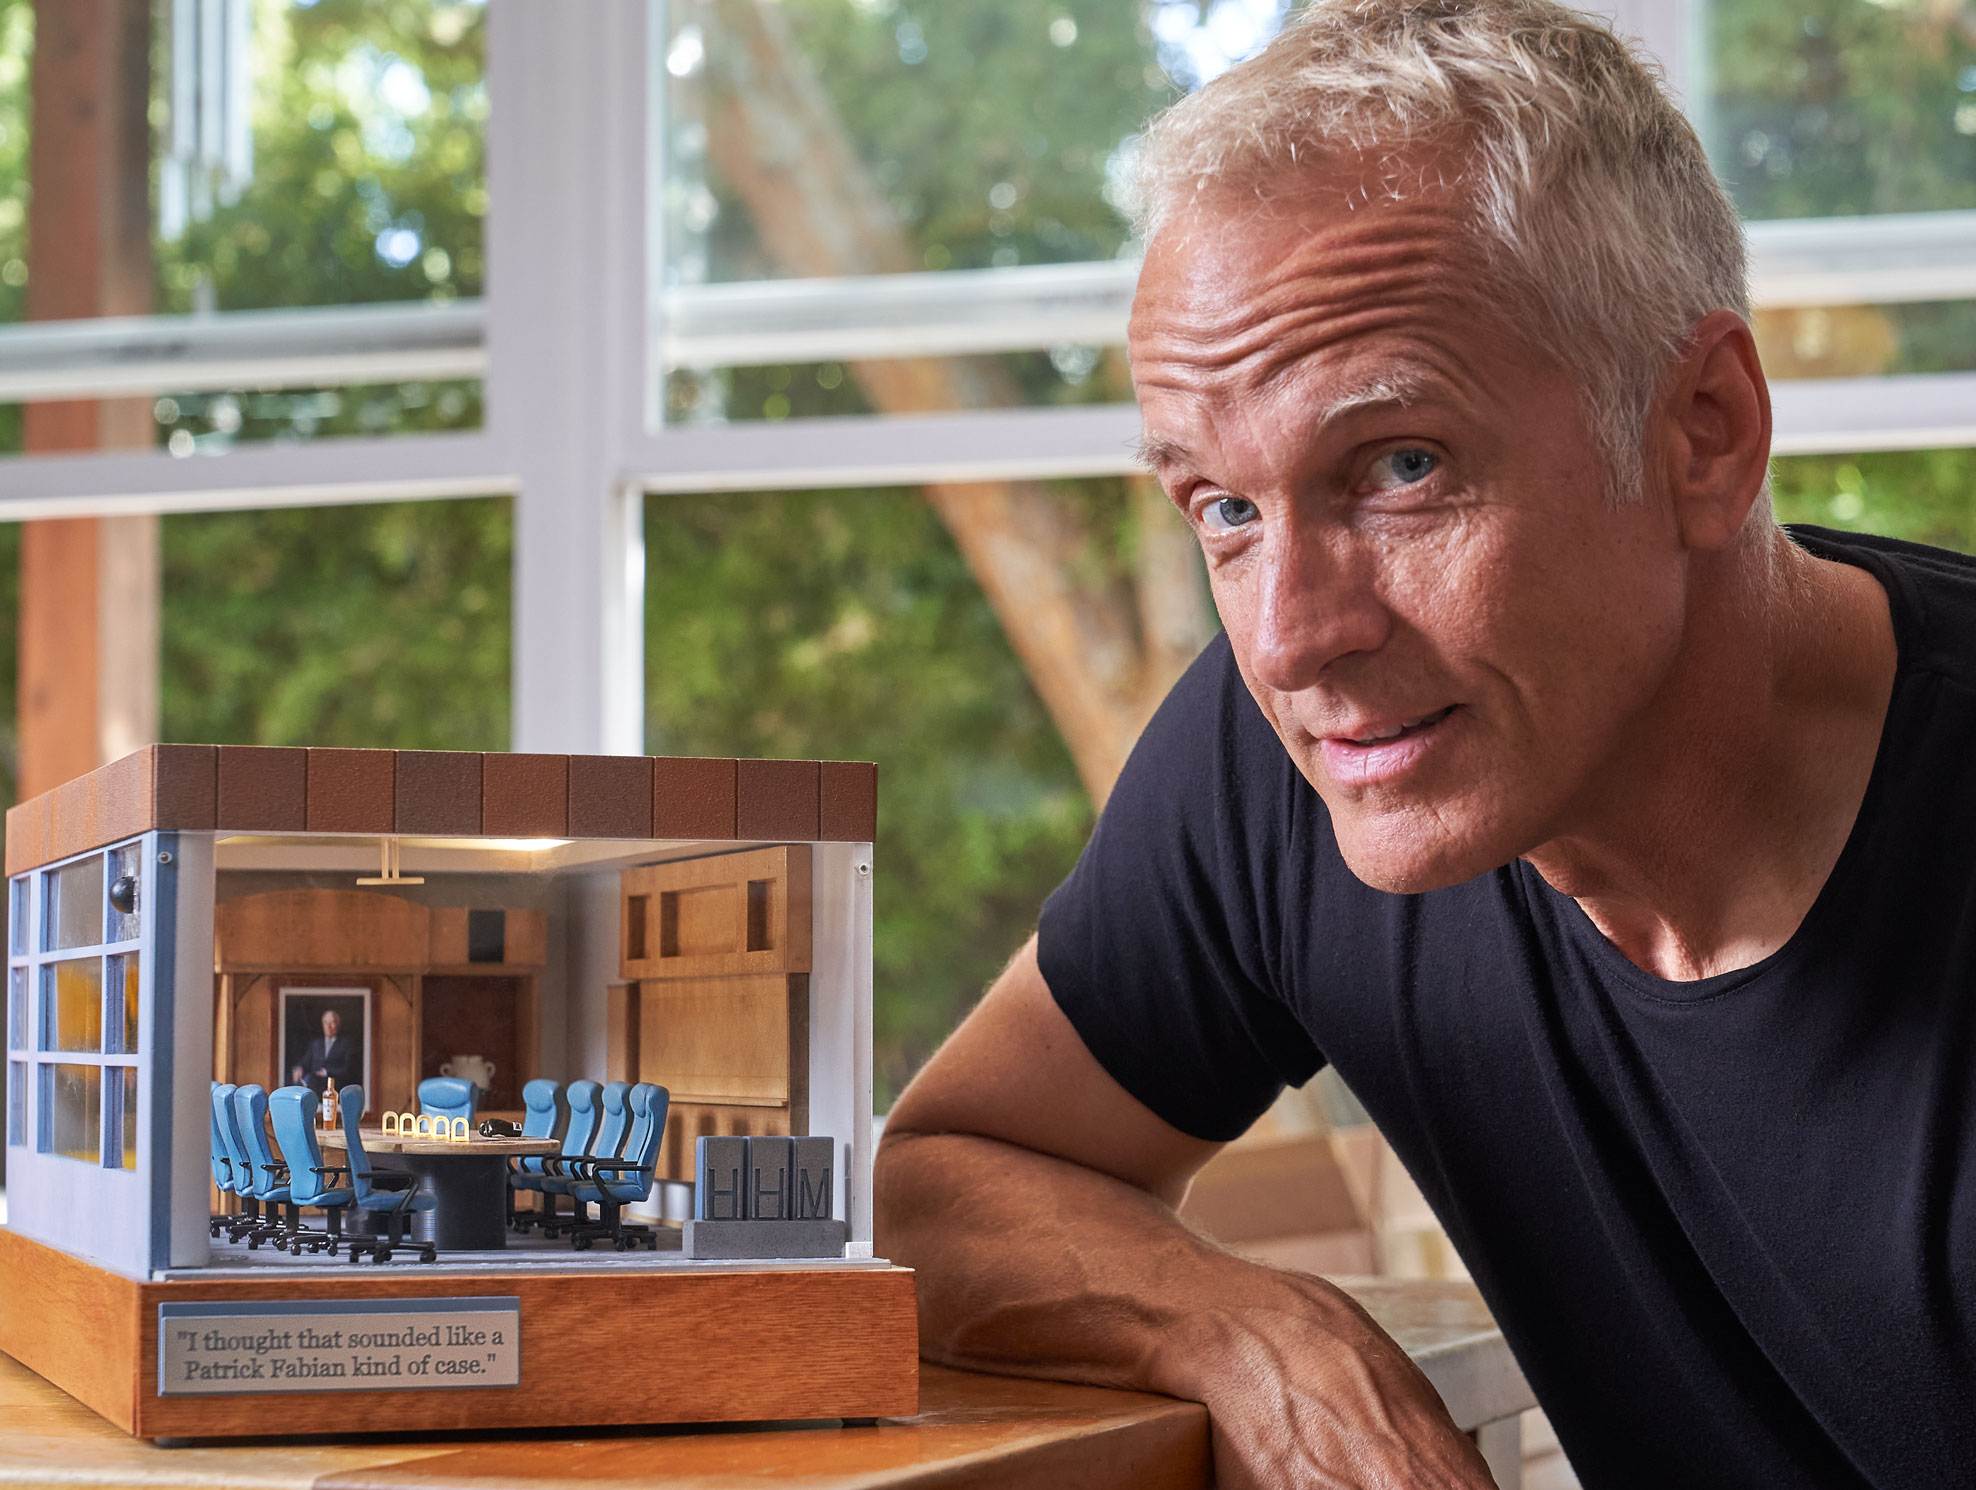 Patrick Fabian poses with a model set of the conference room from Better Call Saul.